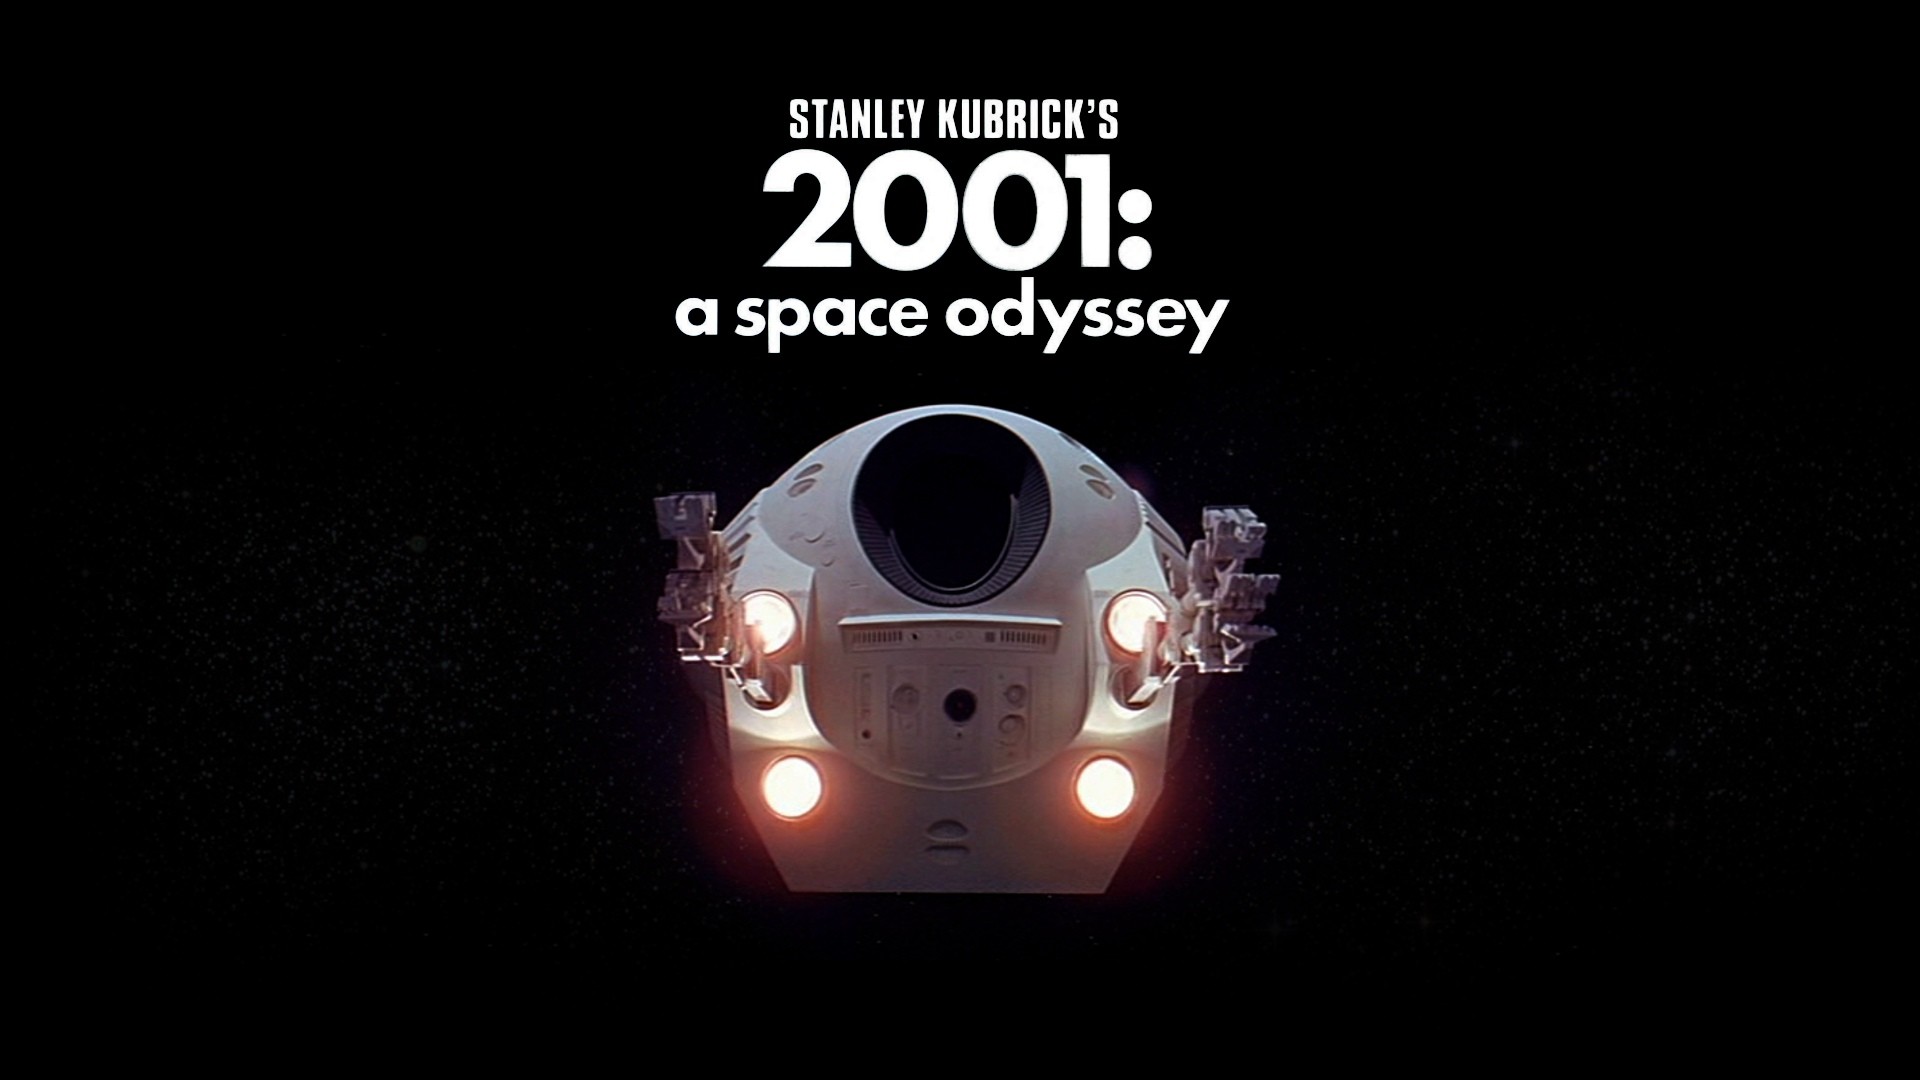 1920x1080 2001 a space odyssey wallpaper - Google Search | S3 | Pinterest | Stanley  kubrick, Thunder and Cinema